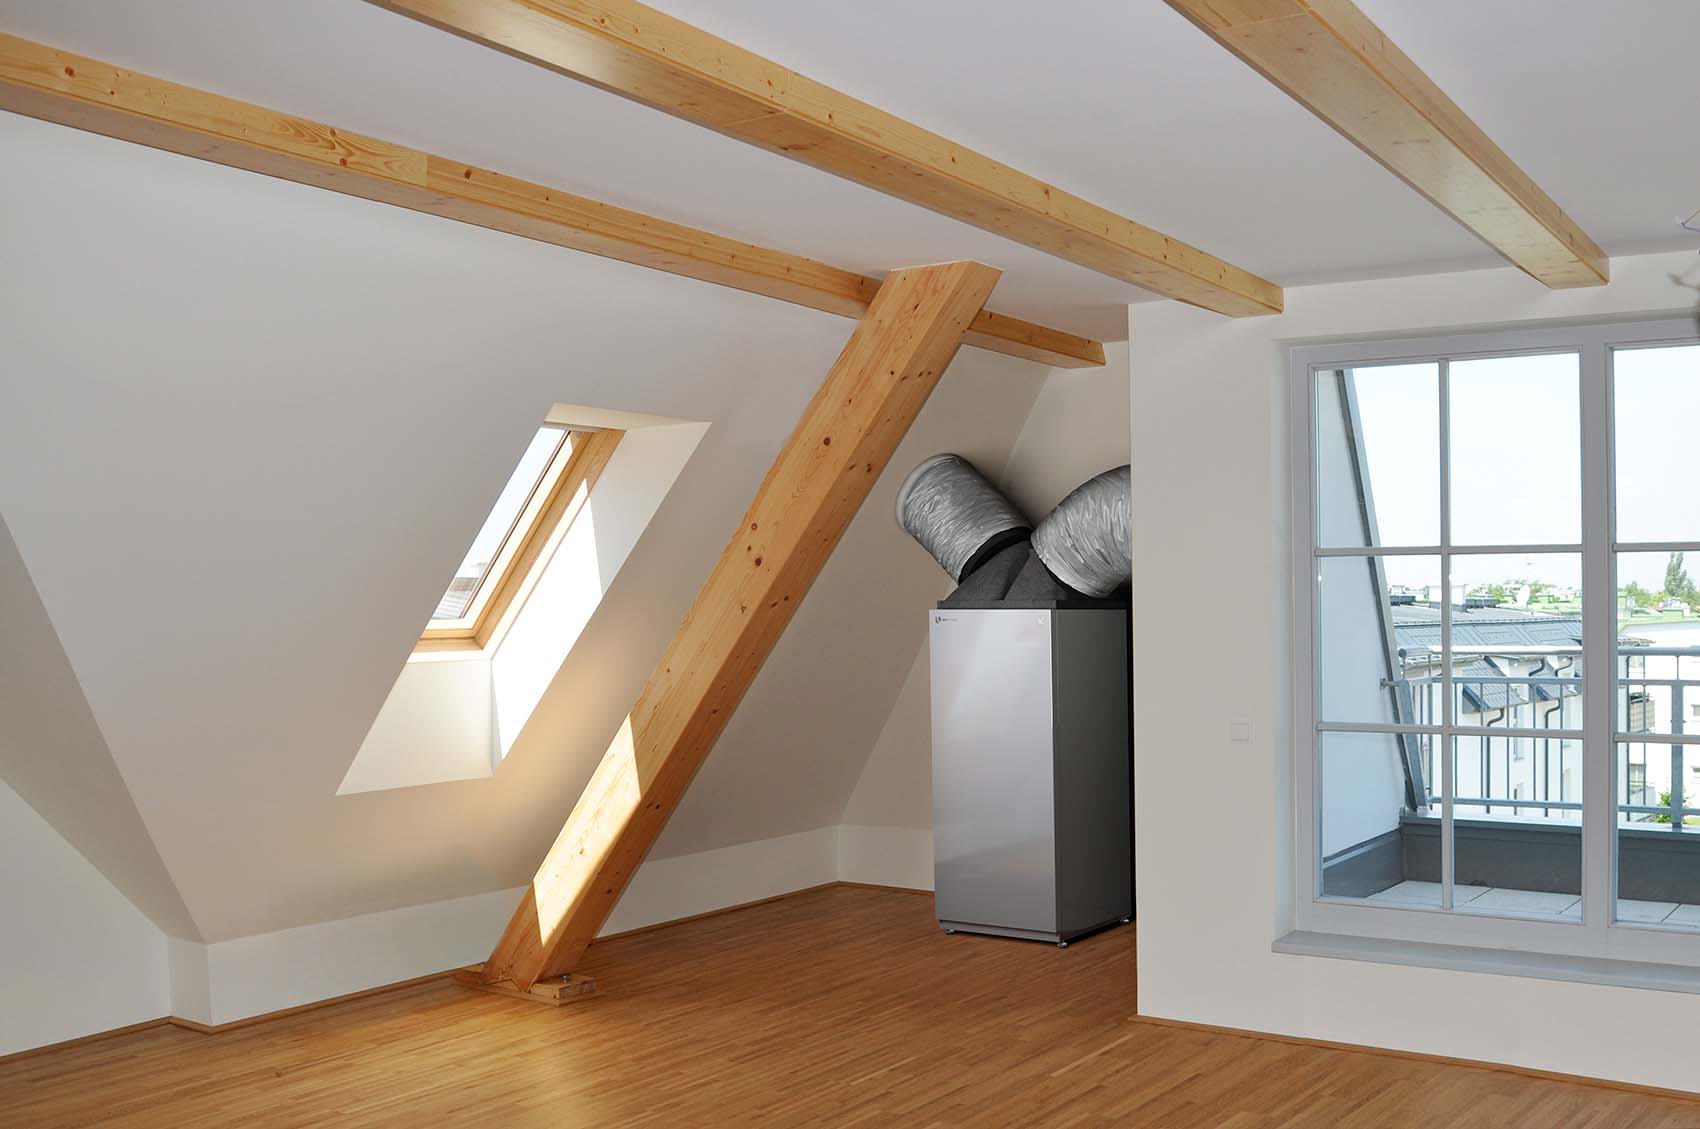 The heat pump Paros can be seen indoors, installed on the attic floor, with air ducts extending into the walls on its left and right side.